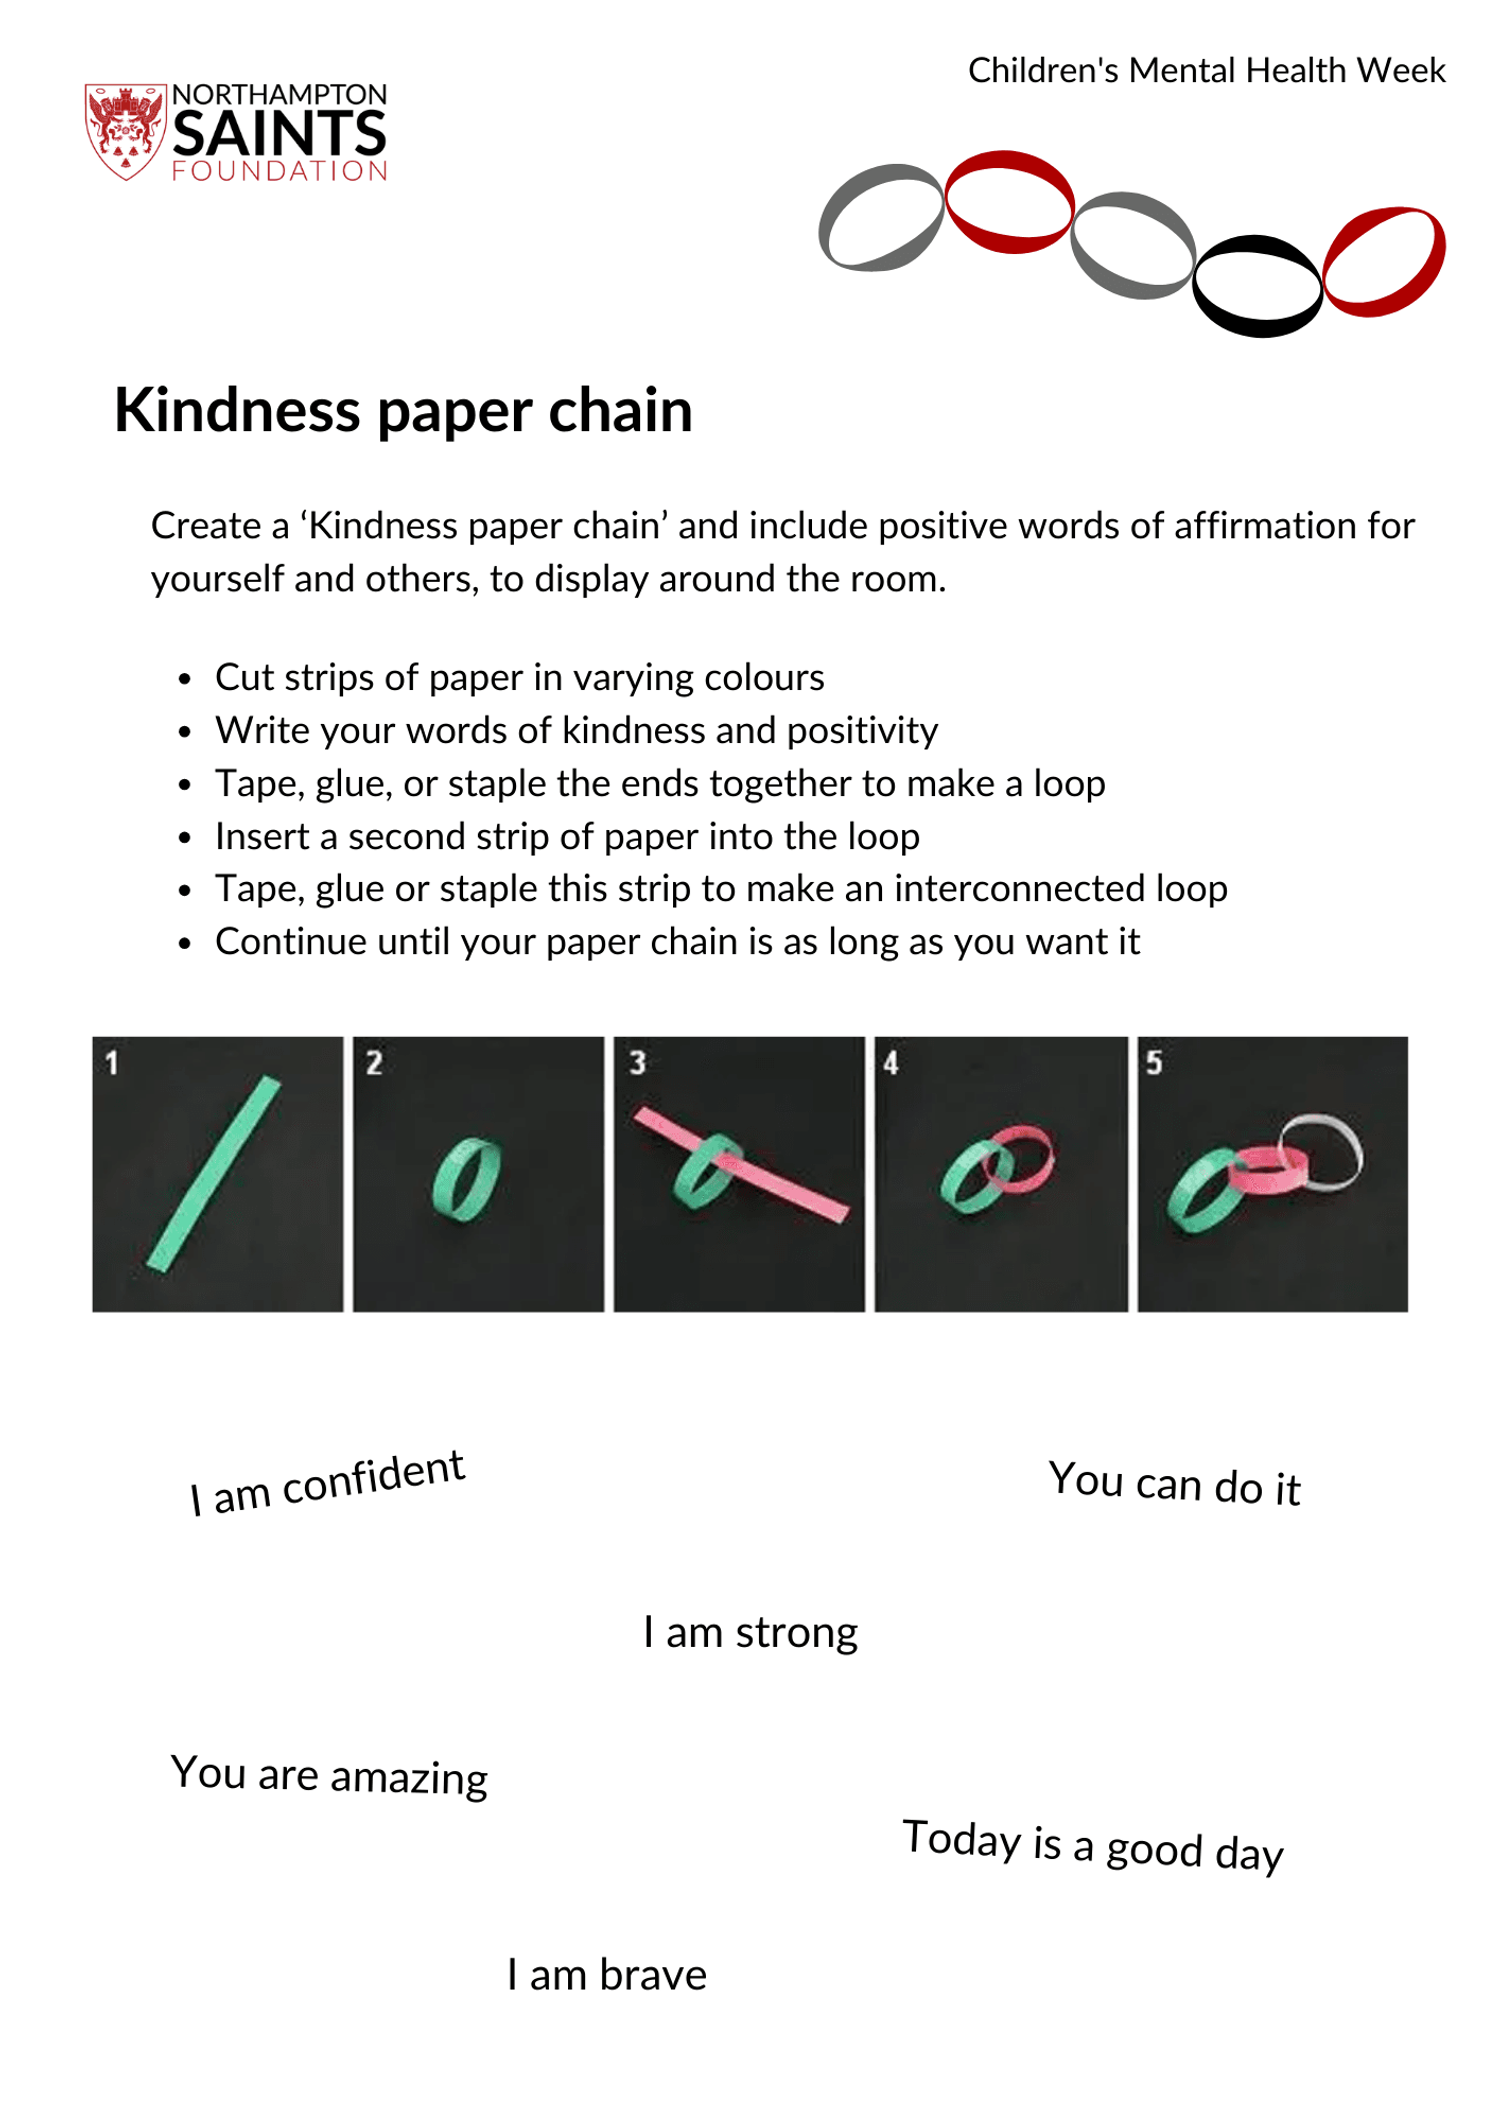 Kindness paperchain